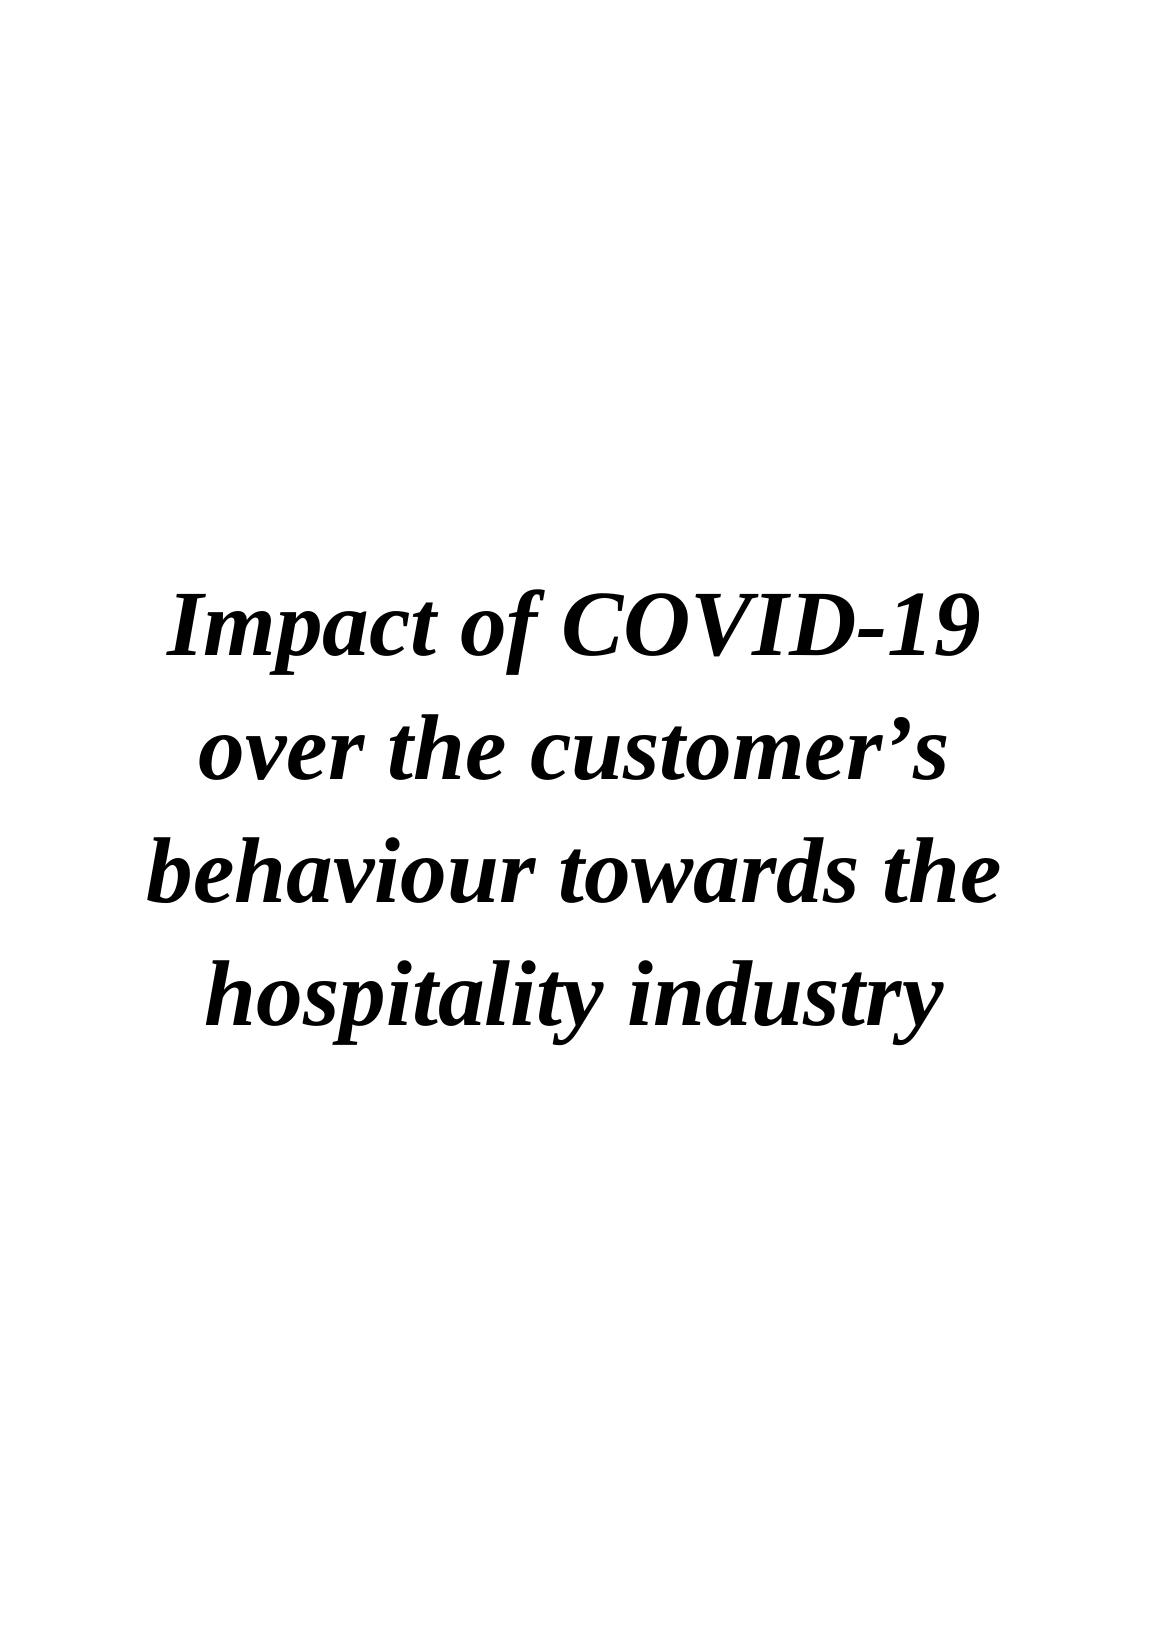 Impact of COVID-19 on Customer Behavior in Hospitality Industry_1